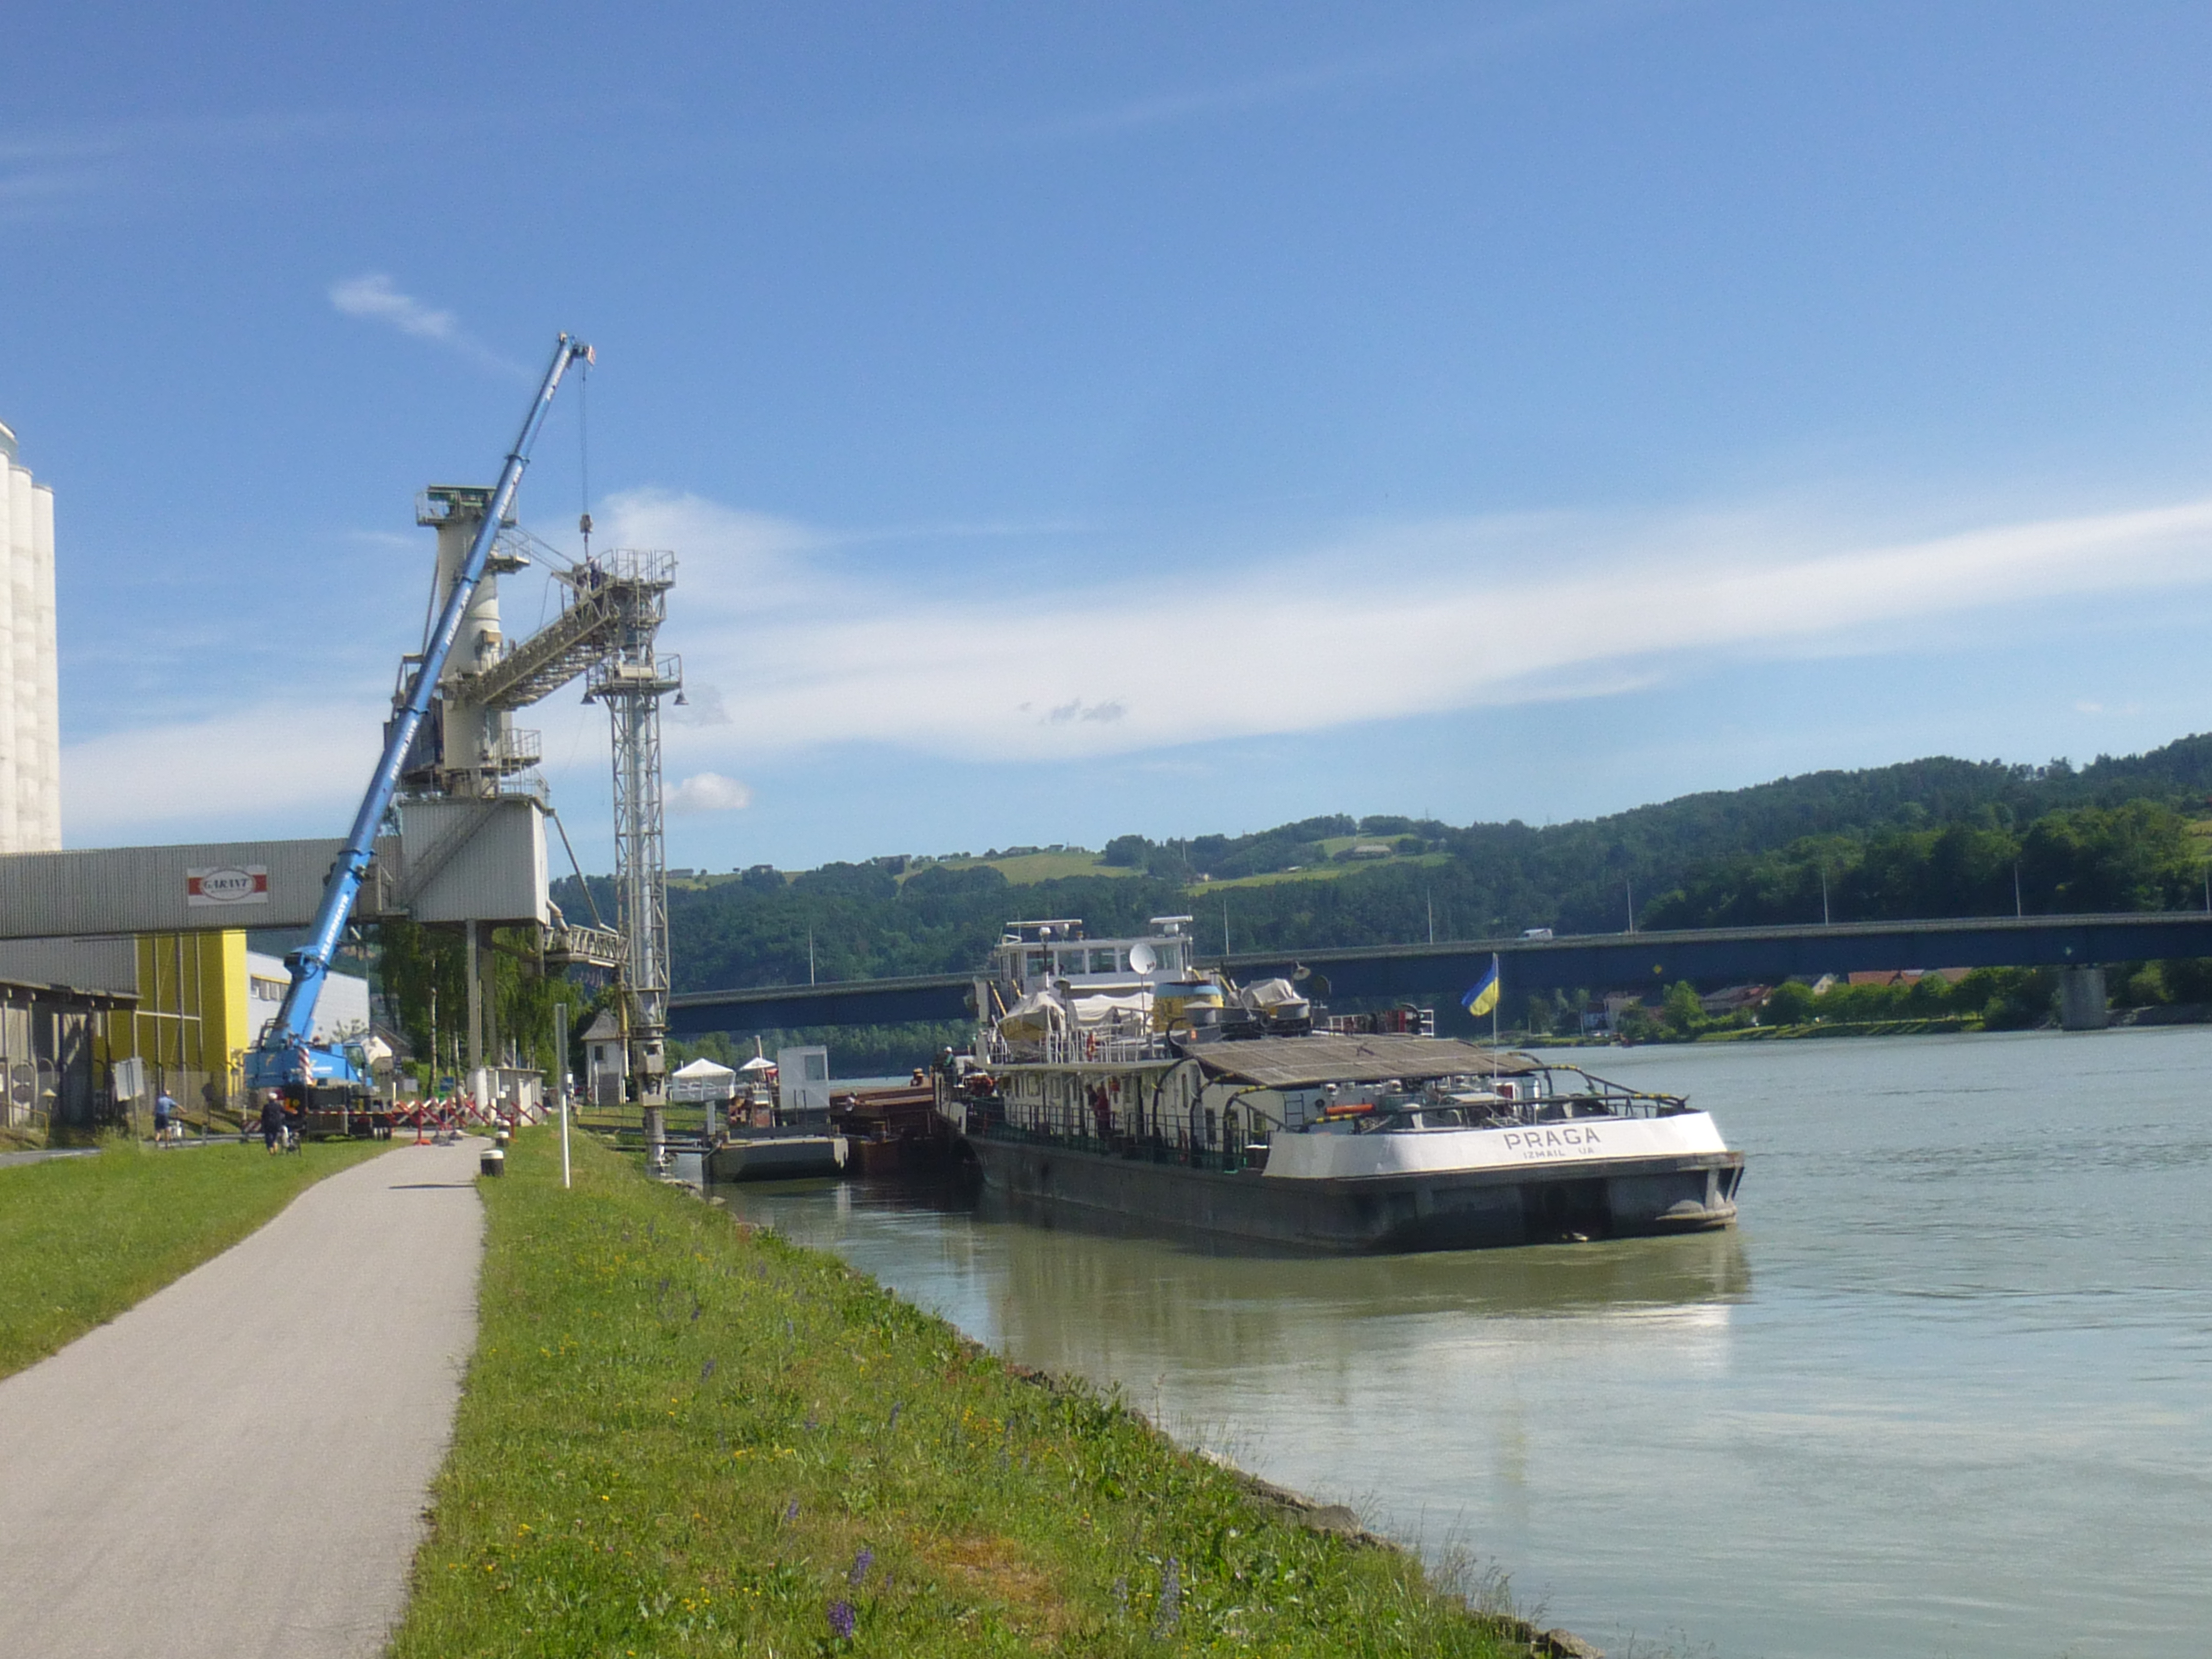 Freight transport volume on the Danube river increased again in 2017